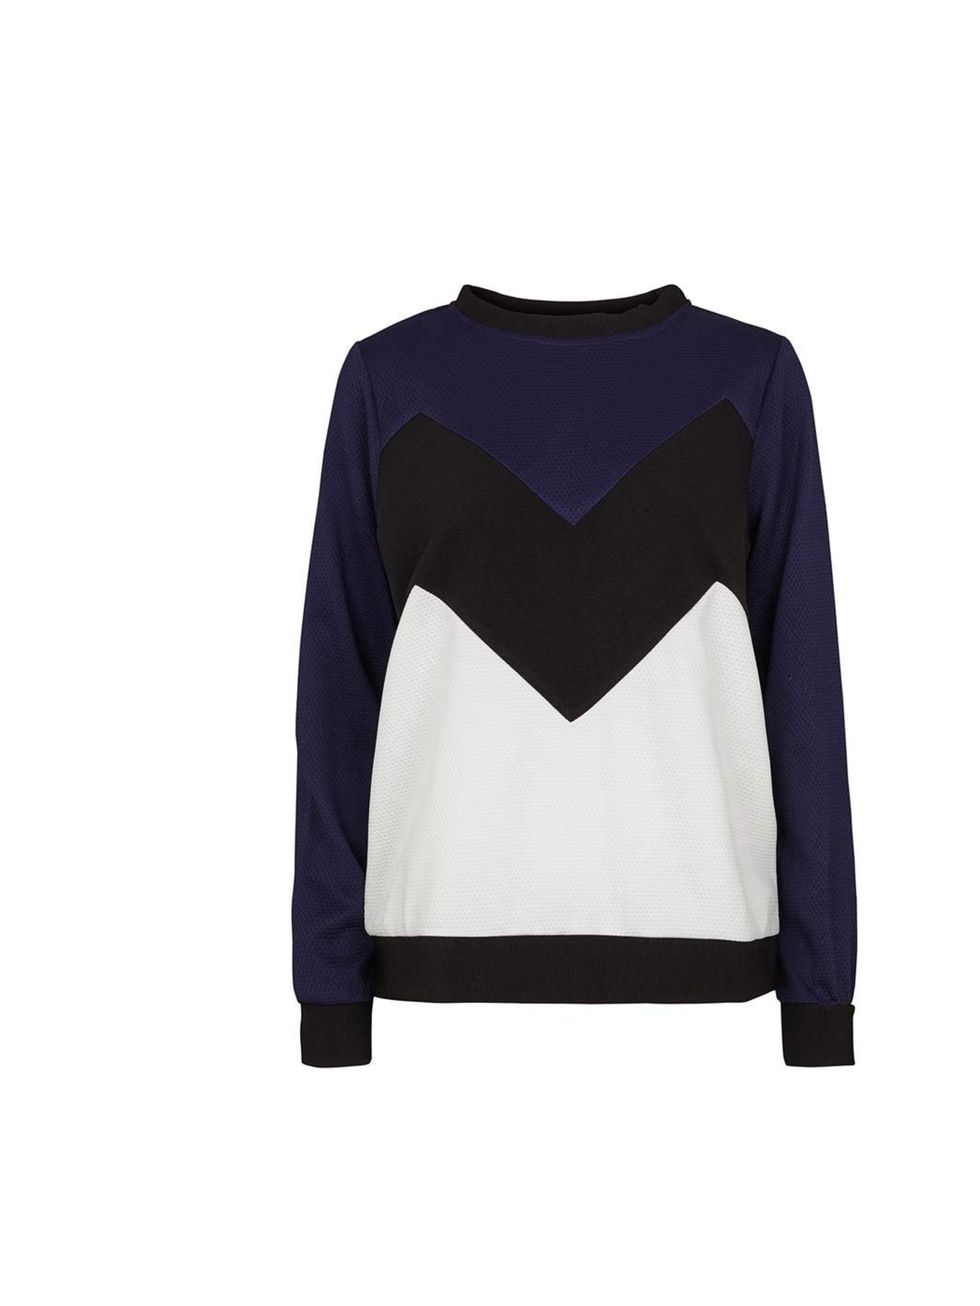 <p>Production Editor Fern Ross is using the recent cold snap as an excuse for a new jumper - every cloud has a silver lining!</p><p><a href="http://femalefirst.dk/en/clear-sweat?color=Blue&siz">Second Female</a> sweatshirt, £66</p>